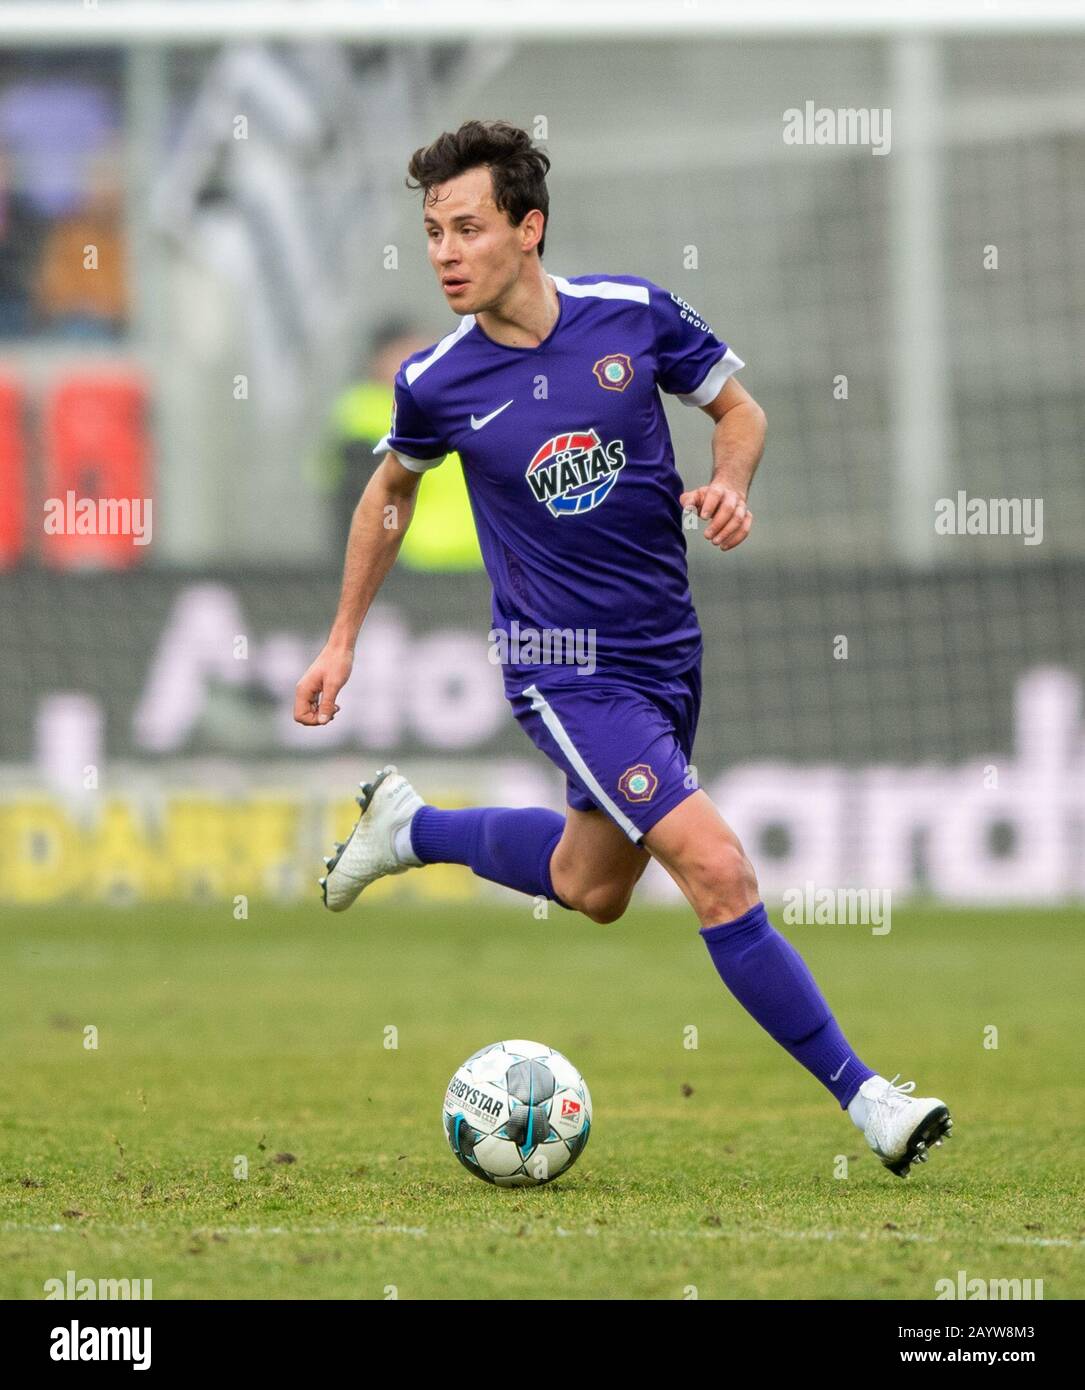 Aue, Germany. 16th Feb, 2020. Football: 2nd Bundesliga, FC Erzgebirge Aue - Holstein Kiel, 22nd matchday, at the Sparkassen-Erzgebirgsstadion. Aues Clemens Fandrich plays the ball. Credit: Robert Michael/dpa-Zentralbild/dpa - IMPORTANT NOTE: In accordance with the regulations of the DFL Deutsche Fußball Liga and the DFB Deutscher Fußball-Bund, it is prohibited to exploit or have exploited in the stadium and/or from the game taken photographs in the form of sequence images and/or video-like photo series./dpa/Alamy Live News Stock Photo